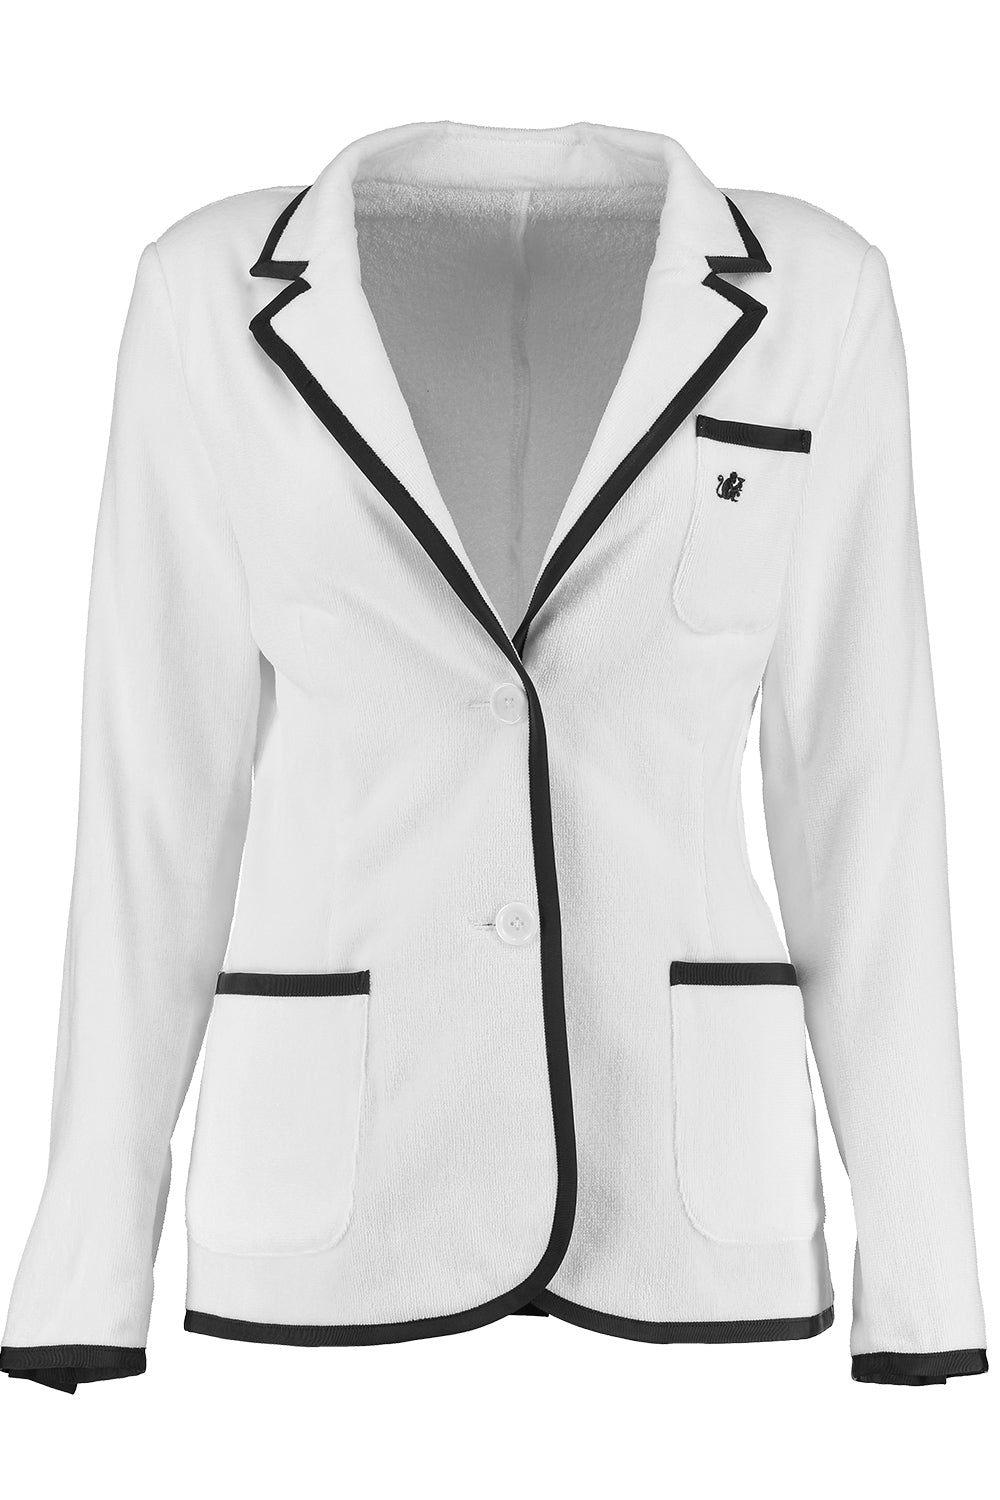 The Domino: Women's White & Black Trim Toweling Blazer (Last One: Size 4 Only)